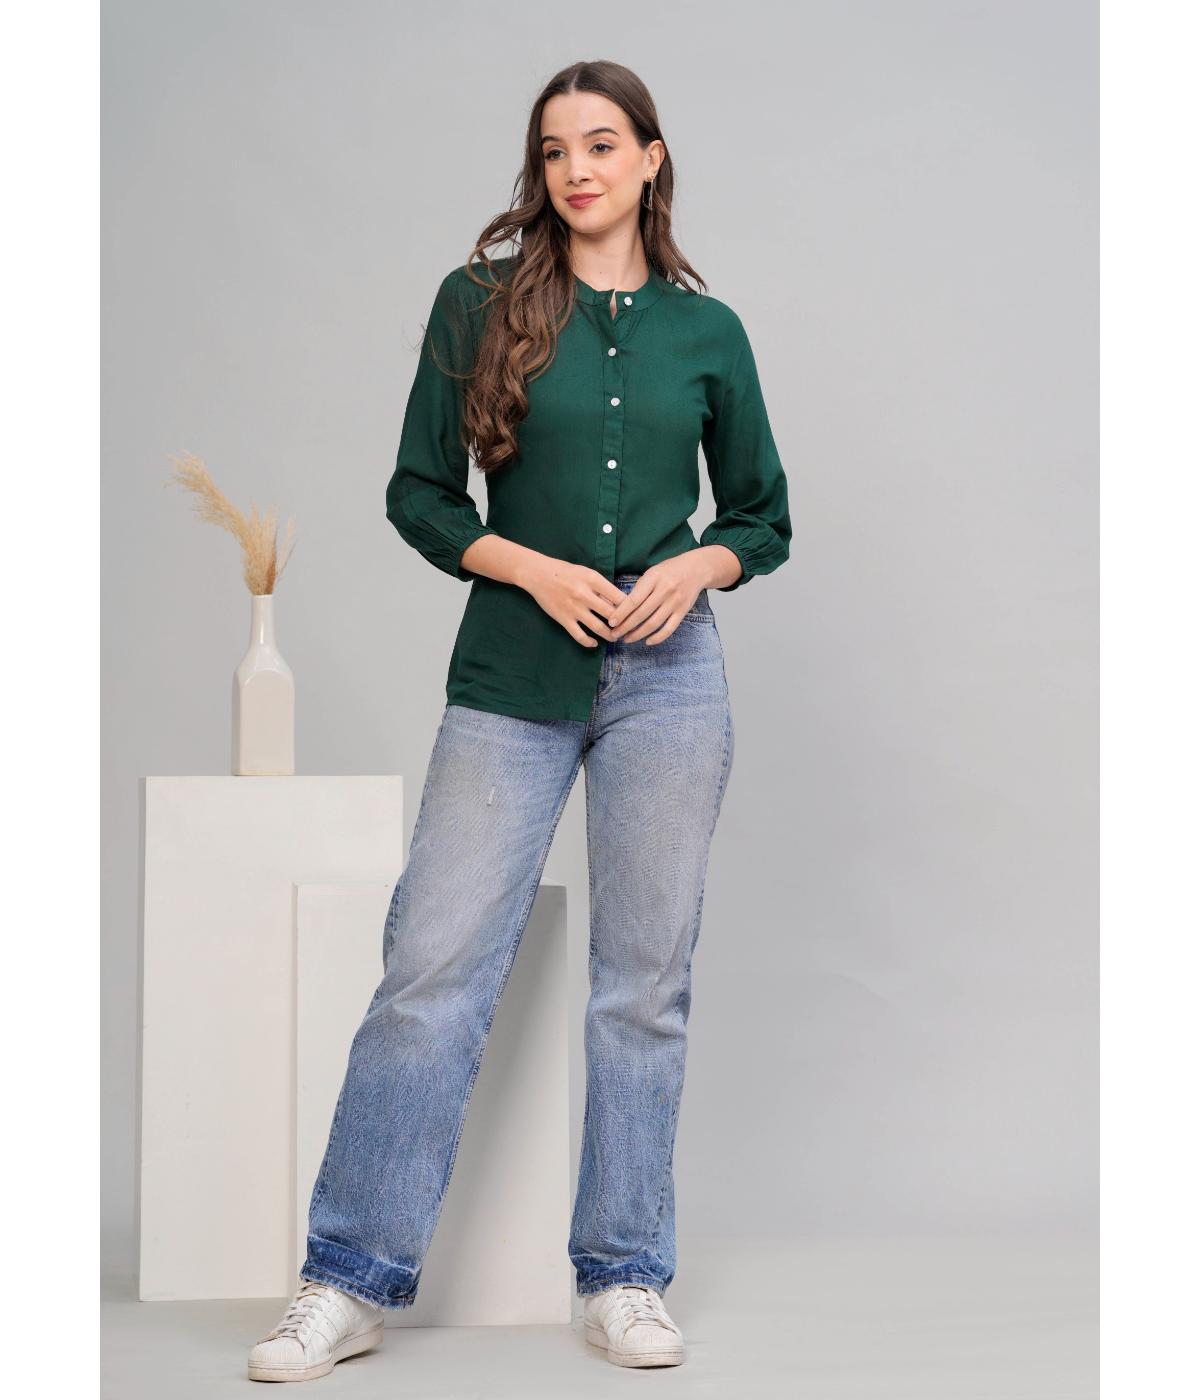 Daevish New Solid Casual Regular Fit Puff Sleeves Shirt for Women & Girl's